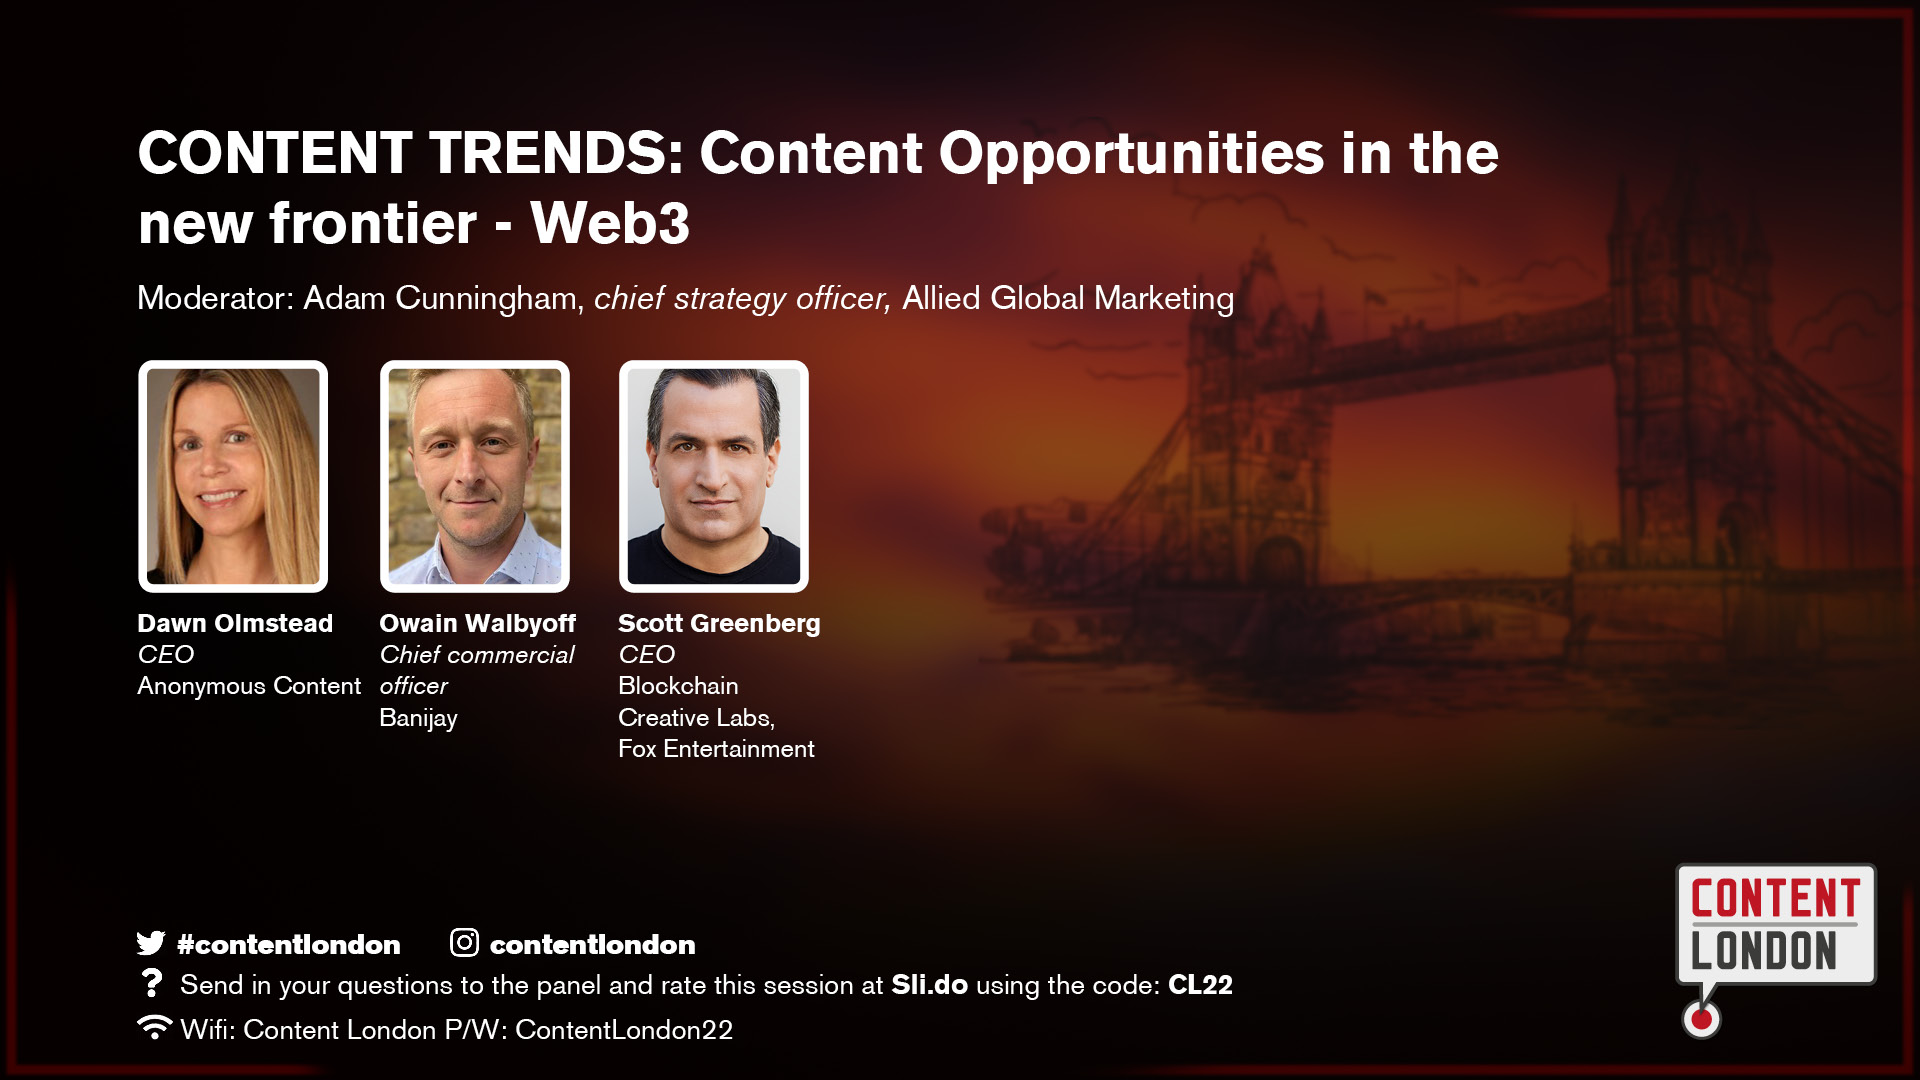 CONTENT TRENDS: Content Opportunities in the new frontier - Web3